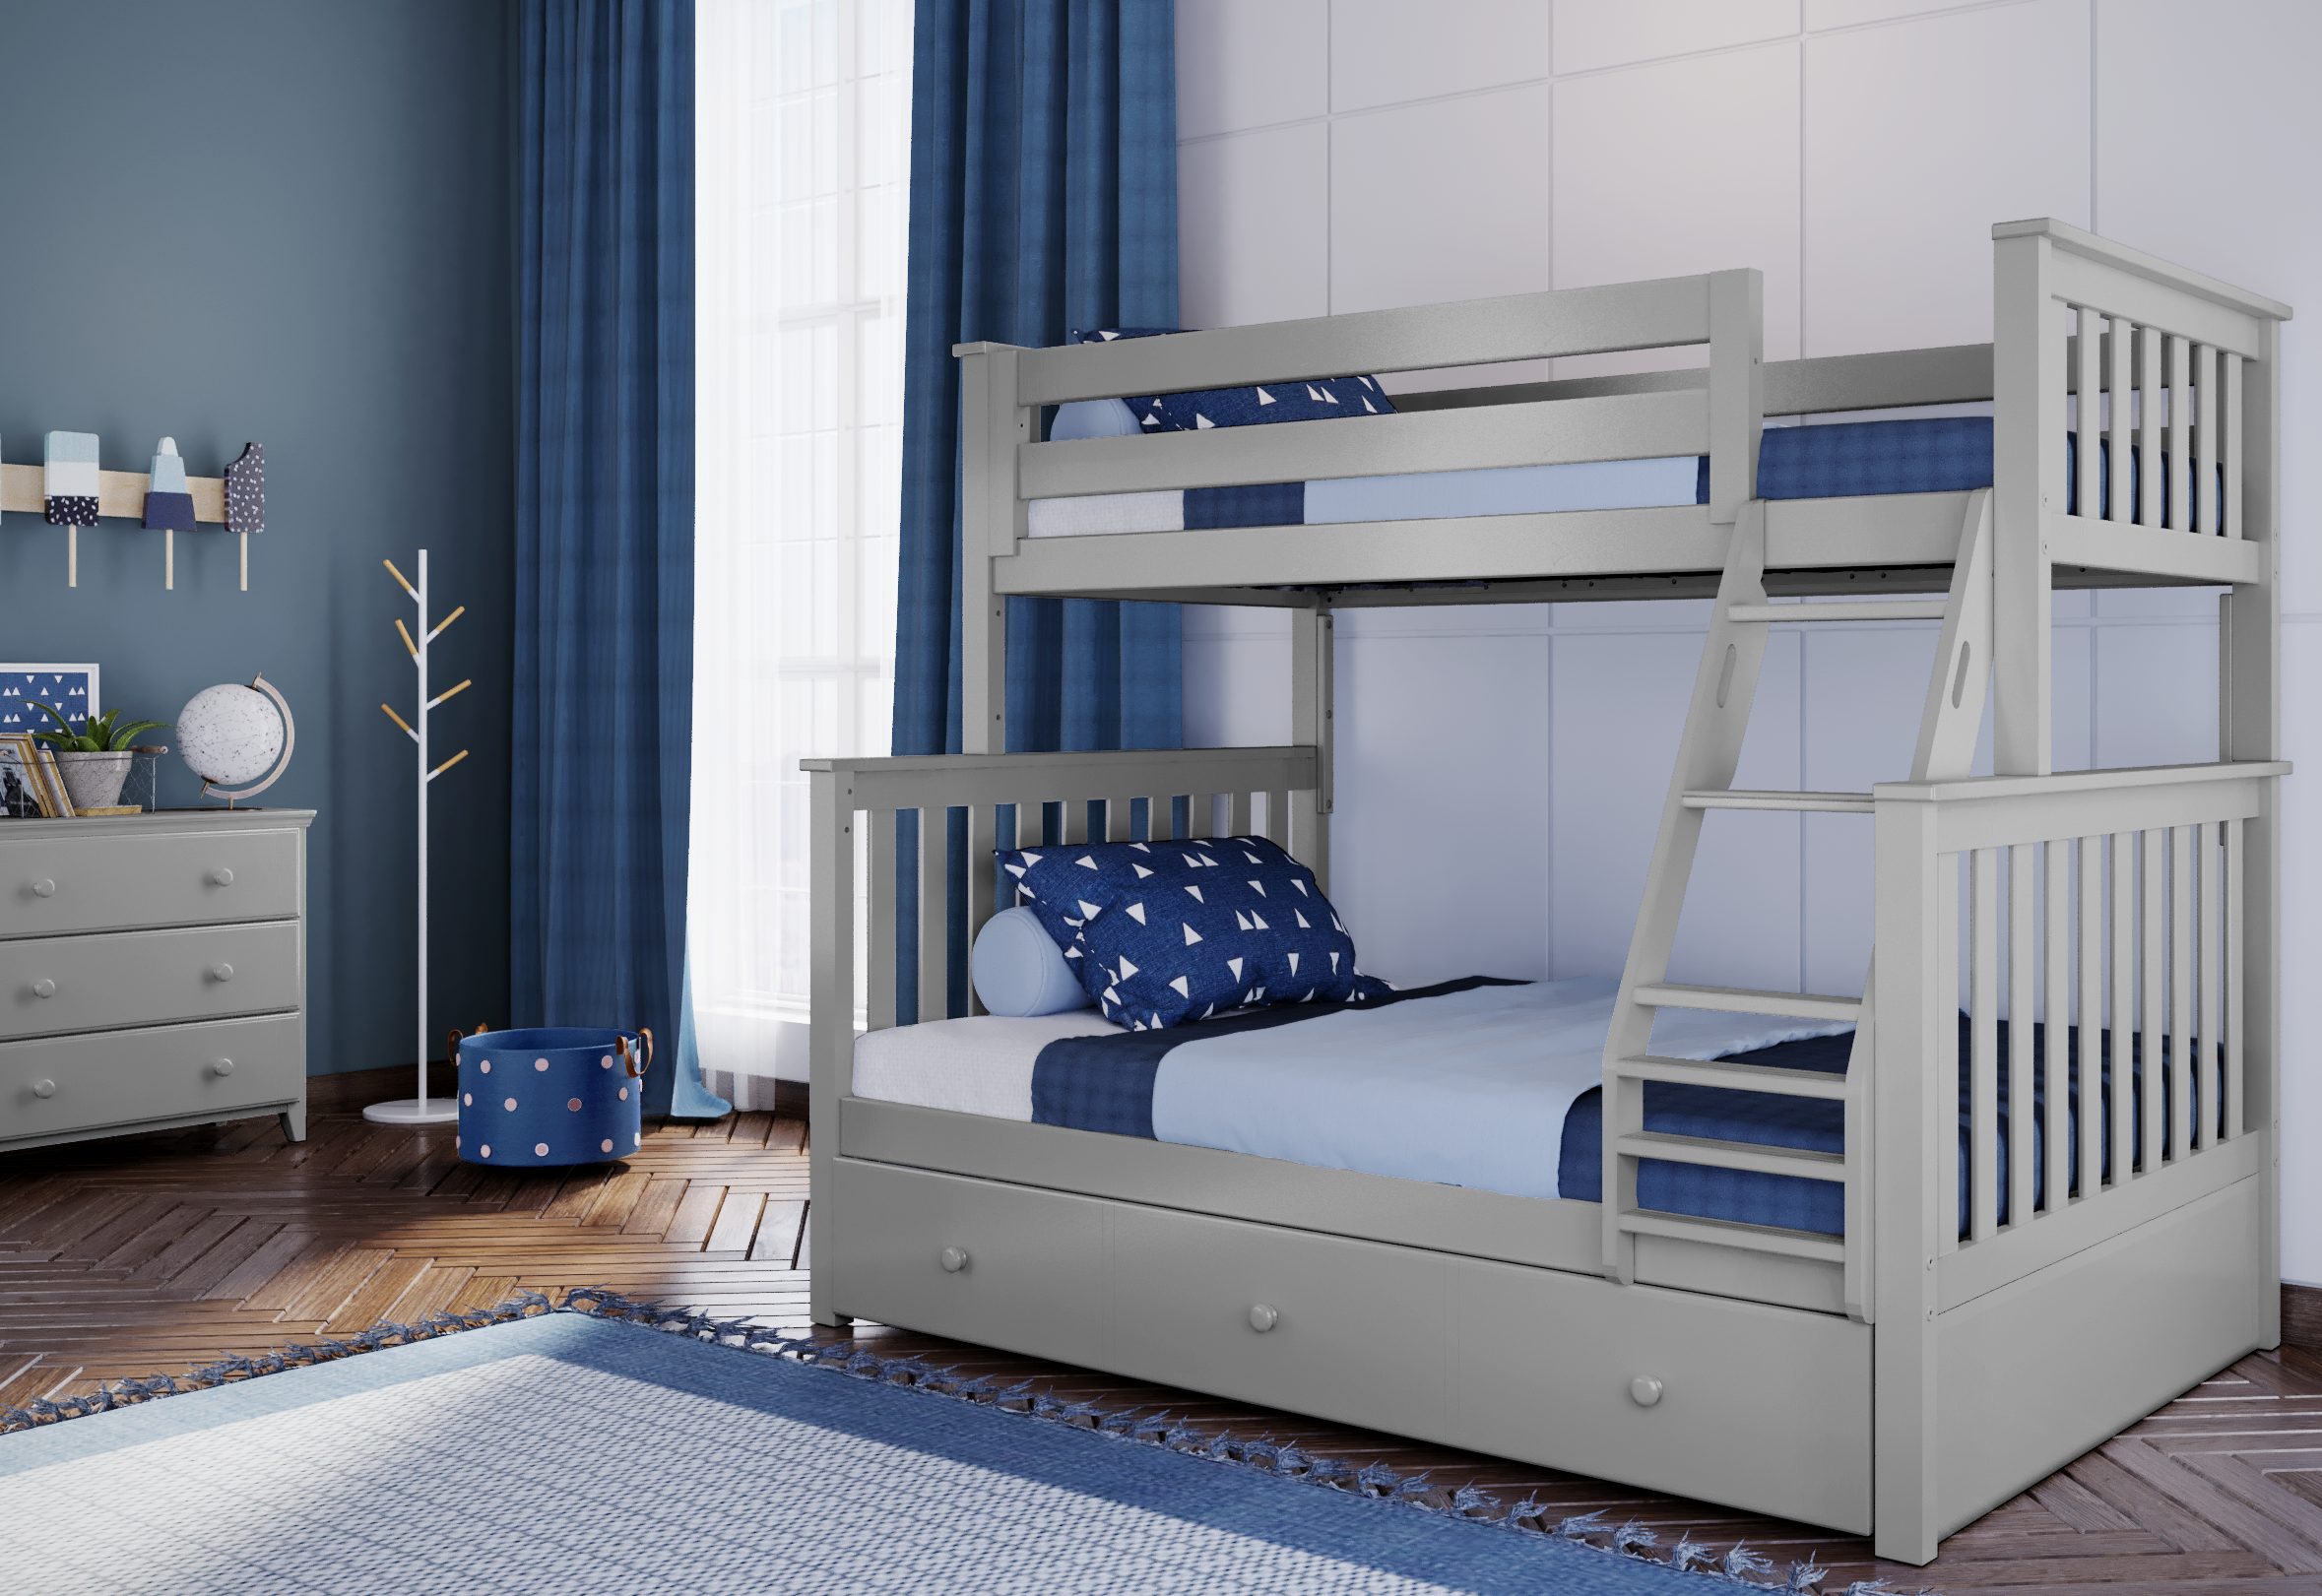 Kent Twin Full Bunk Bed With Angled, Cambridge Staircase Bunk Bed With Trundle